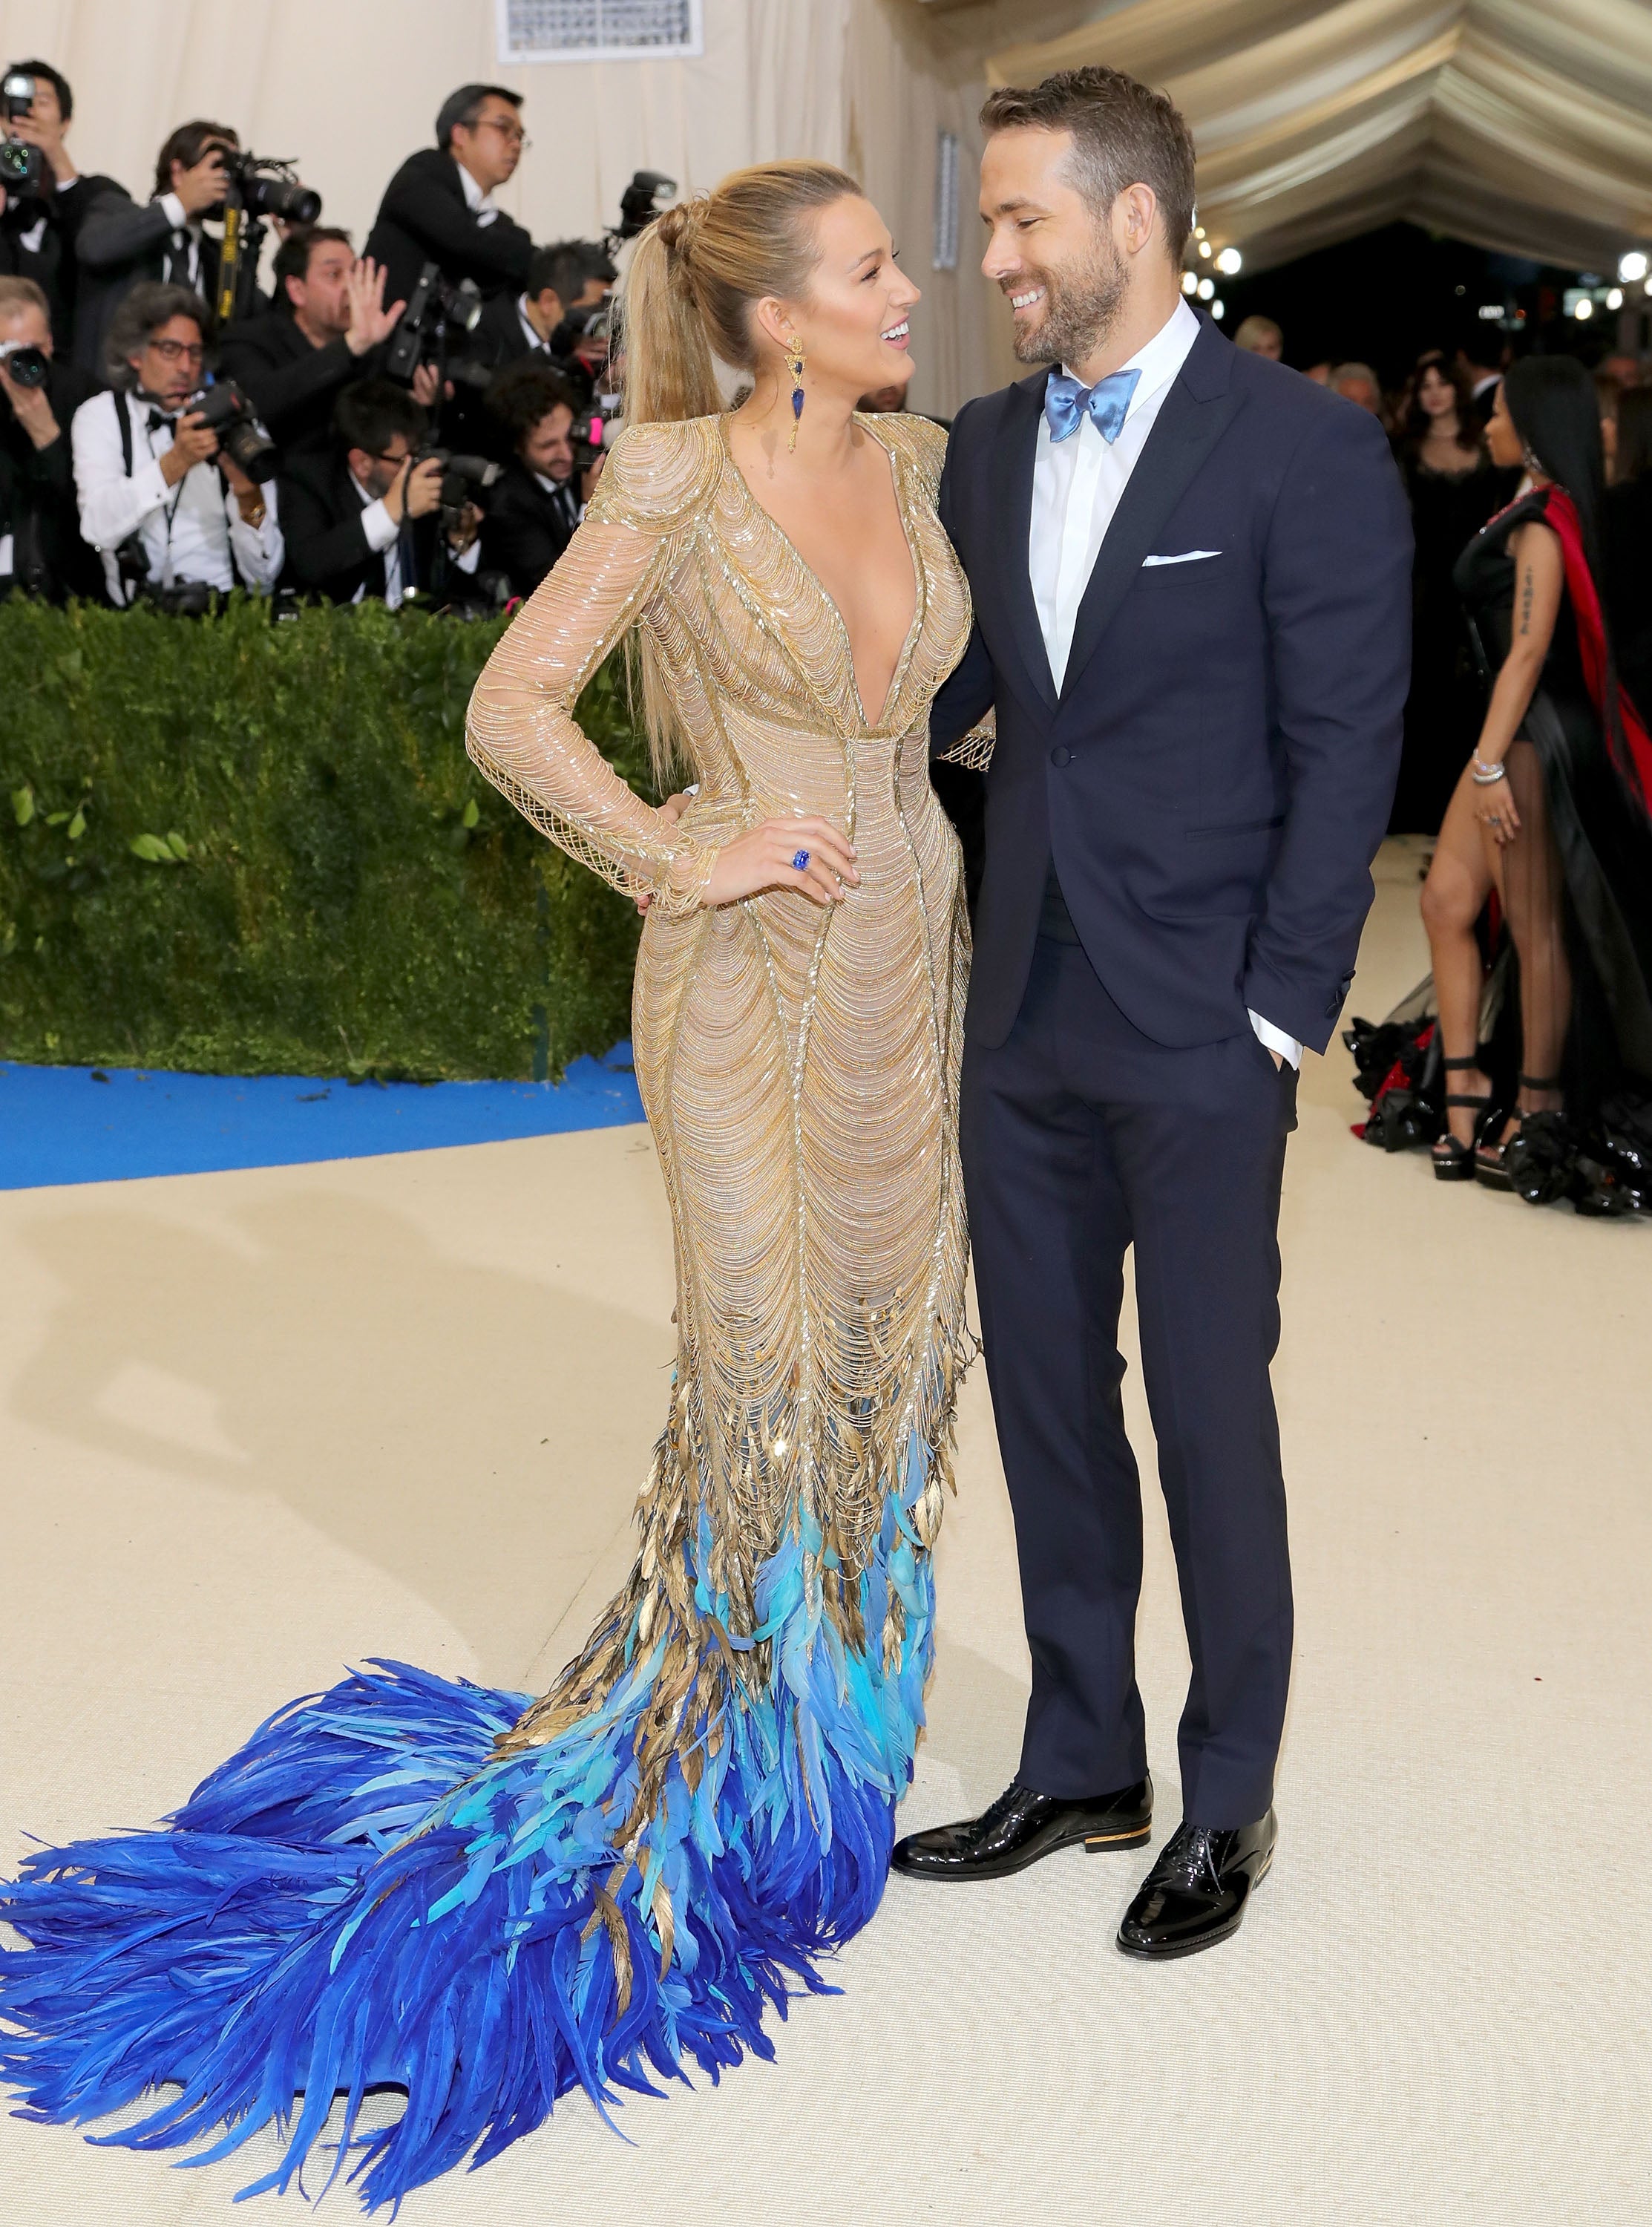 Blake Lively (L) Ryan Reynolds attend the "Rei Kawakubo/Comme des Garcons: Art Of The In-Between" Costume Institute Gala at Metropolitan Museum of Art on May 1, 2017